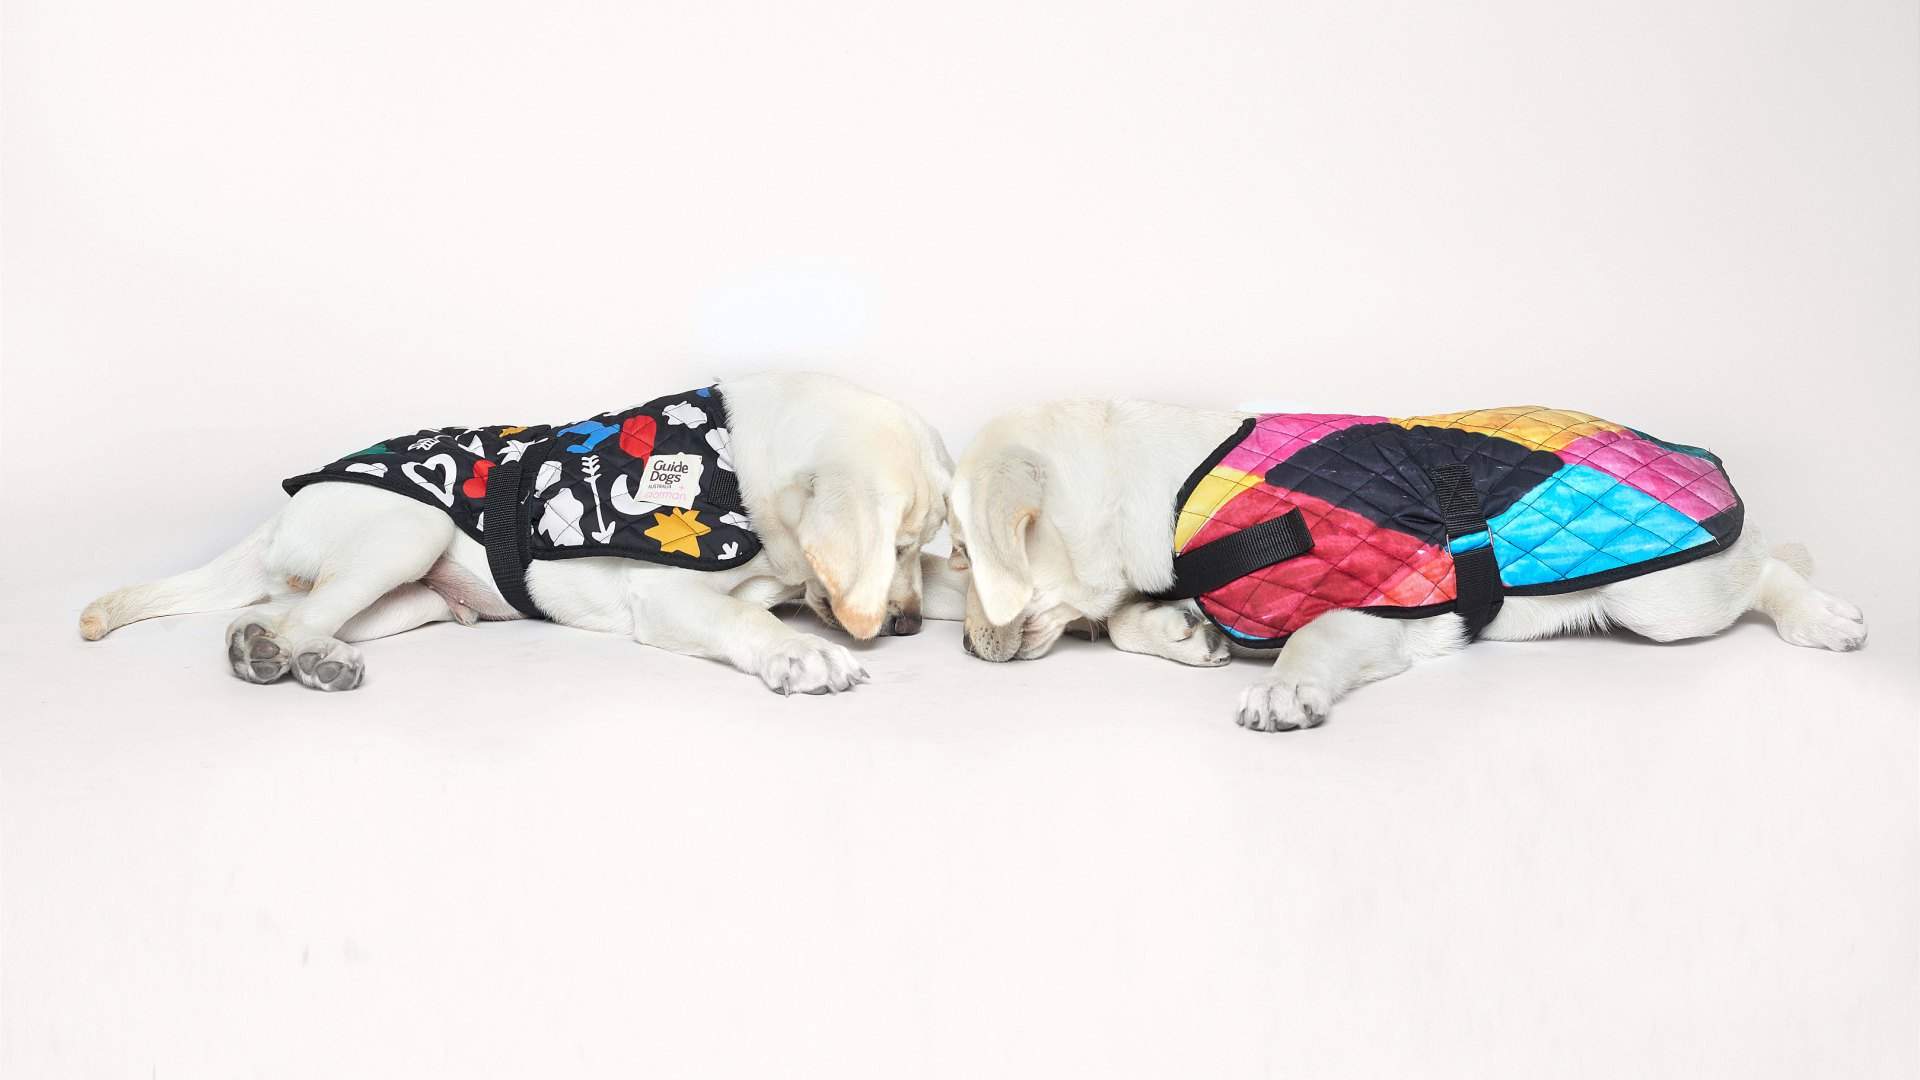 Elk and Gorman Have Just Launched a Charming New Winter Collection for Your Pup